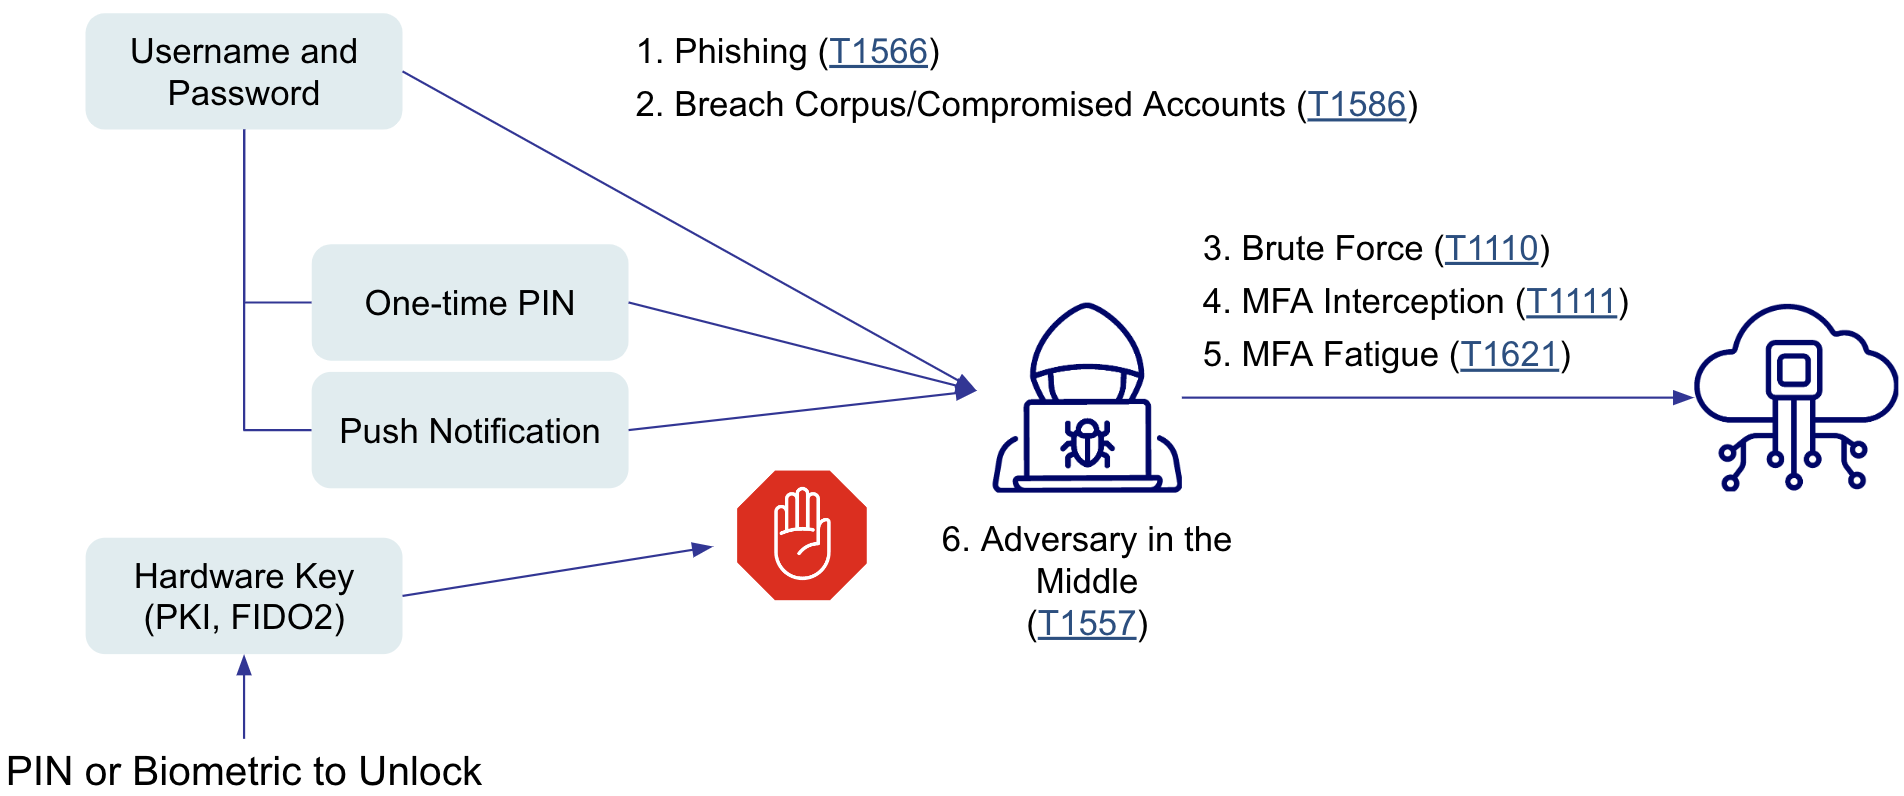 Most alternative authenticators used today such as passwords, OTPs, or push notifications are susceptible to common attacks such as phishing, compromised accounts, adversary in the middle, brute force, MFA interception, or MFA fatigue. Hardware keys like PKI or FIDO are less prone to these types of attacks.